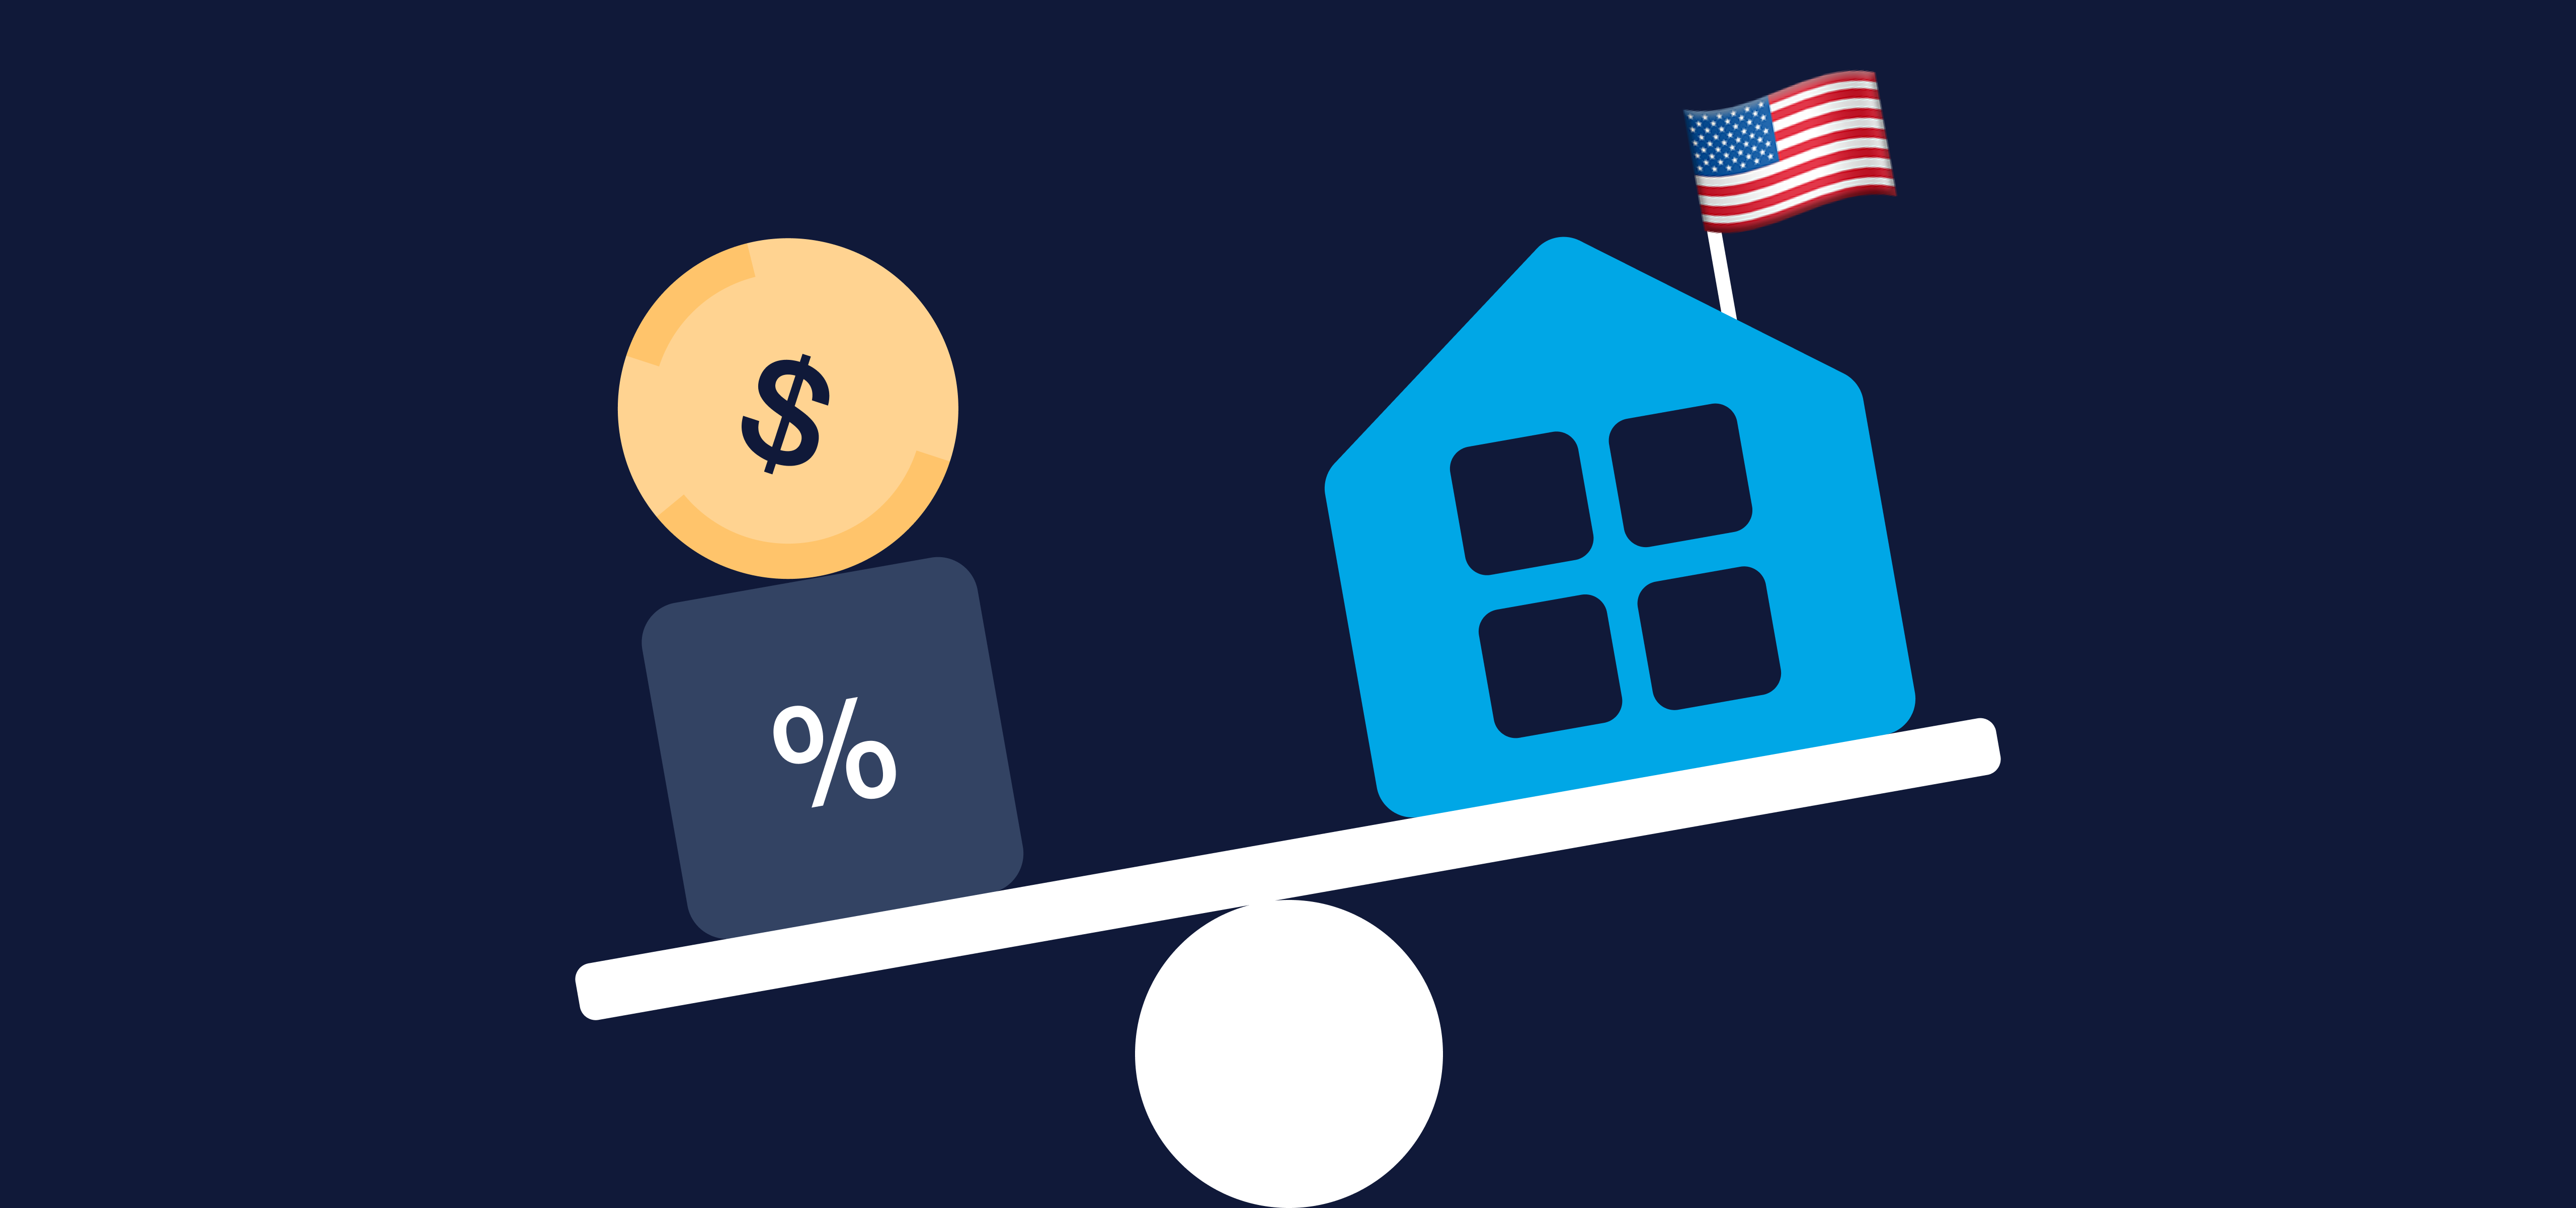 An illustrated house with a U.S. flag on top of it is balanced on one side of a seesaw, while the other side is weighed down by an icon with a dollar sign stacked on top of an icon with a percentage sign.